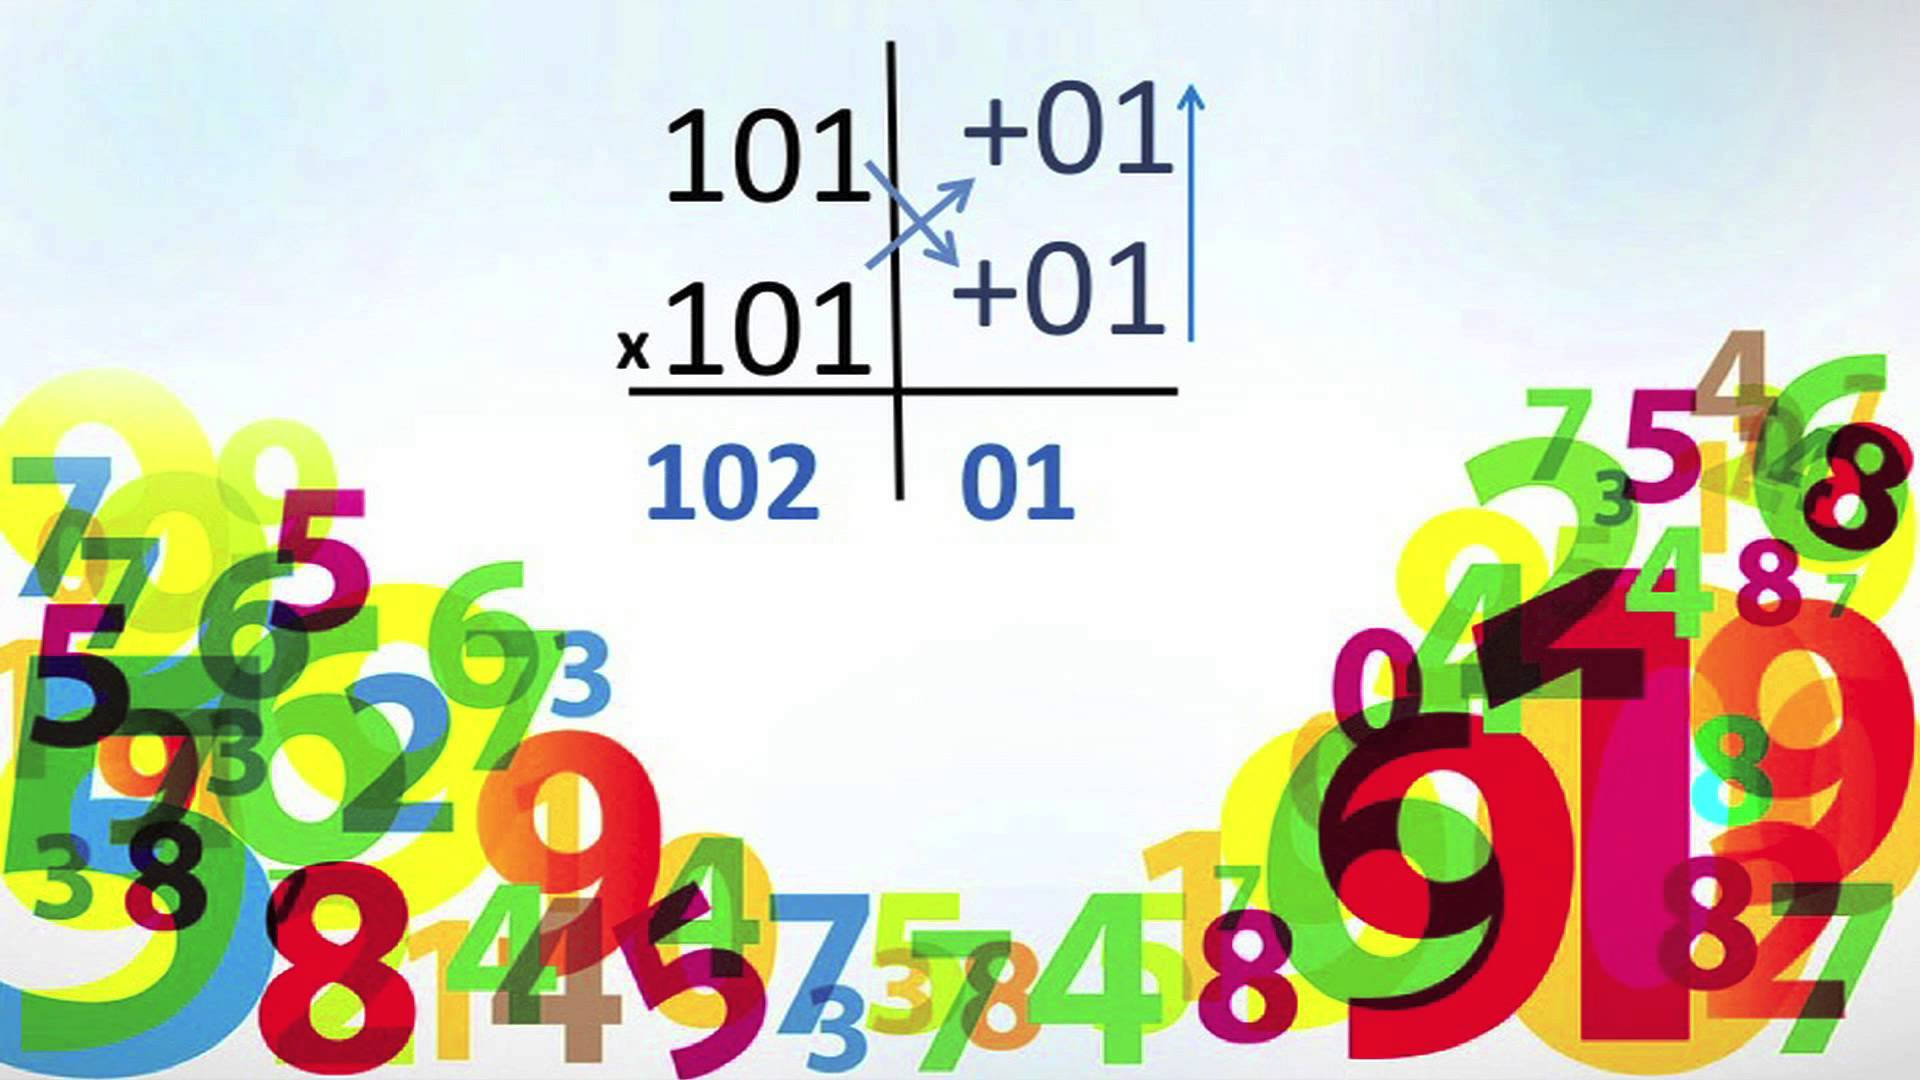 Mathematics Colorful Numbers Wallpaper